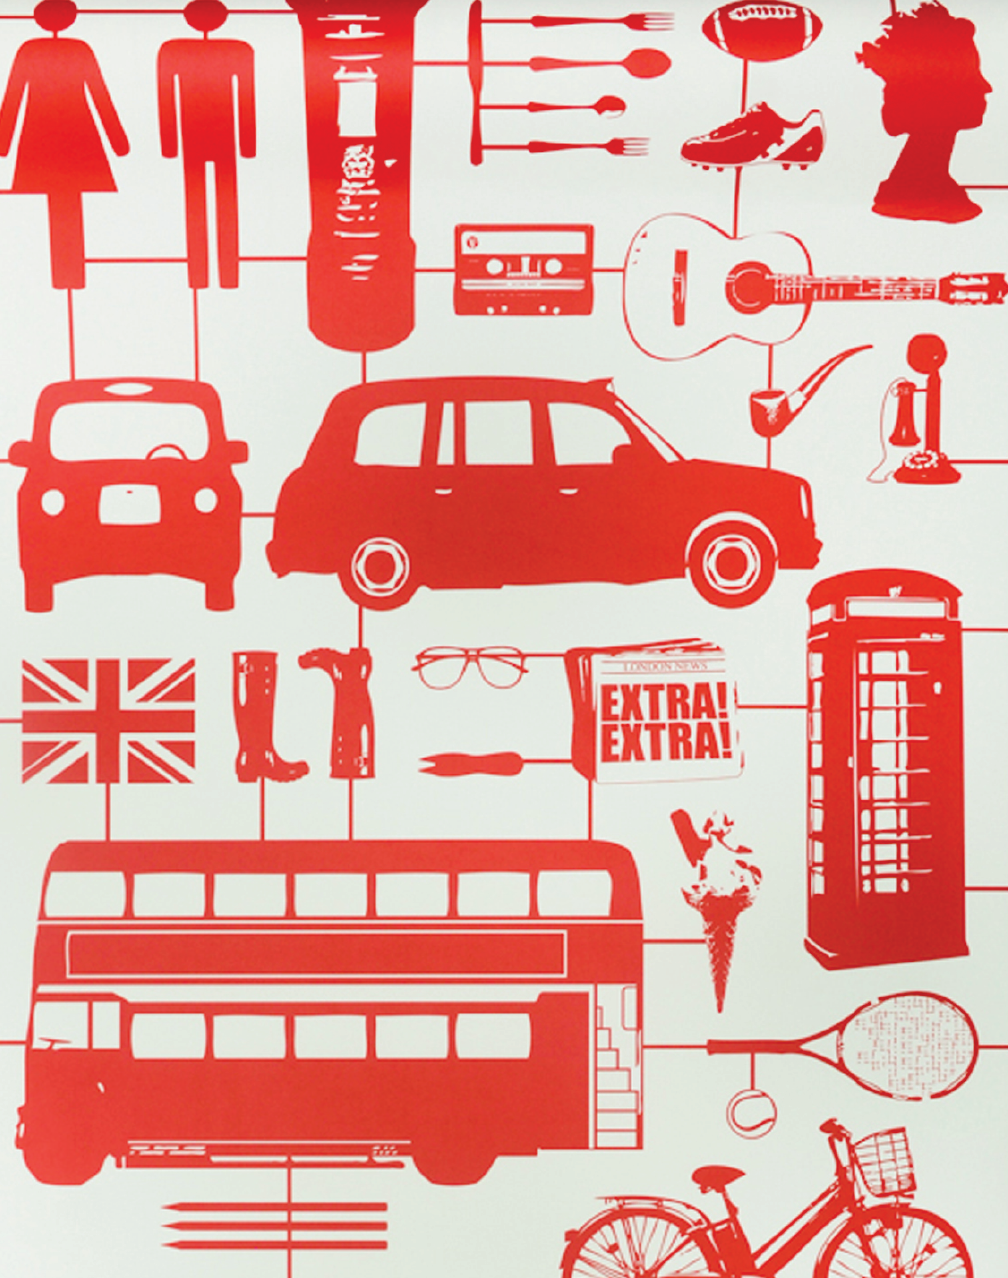 Airfix London Wallpaper in Red